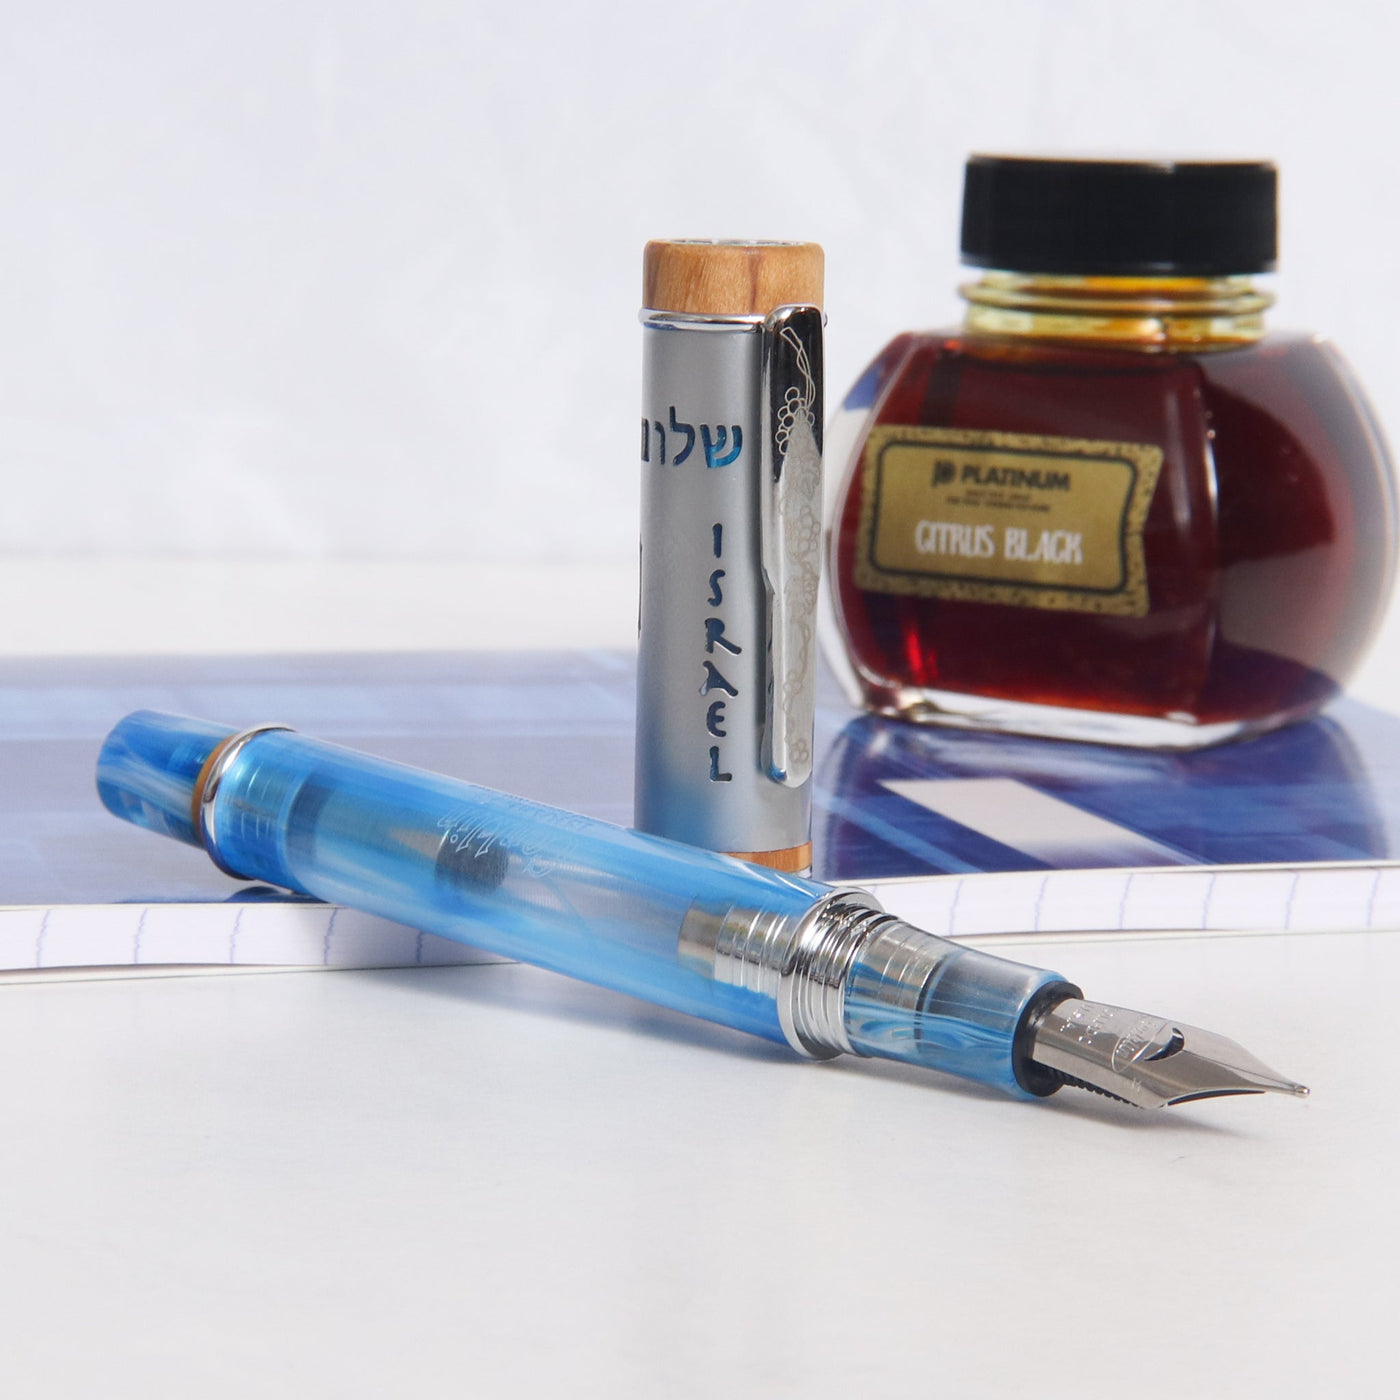 Conklin Israel 75 Limited Edition Fountain Pen Uncapped